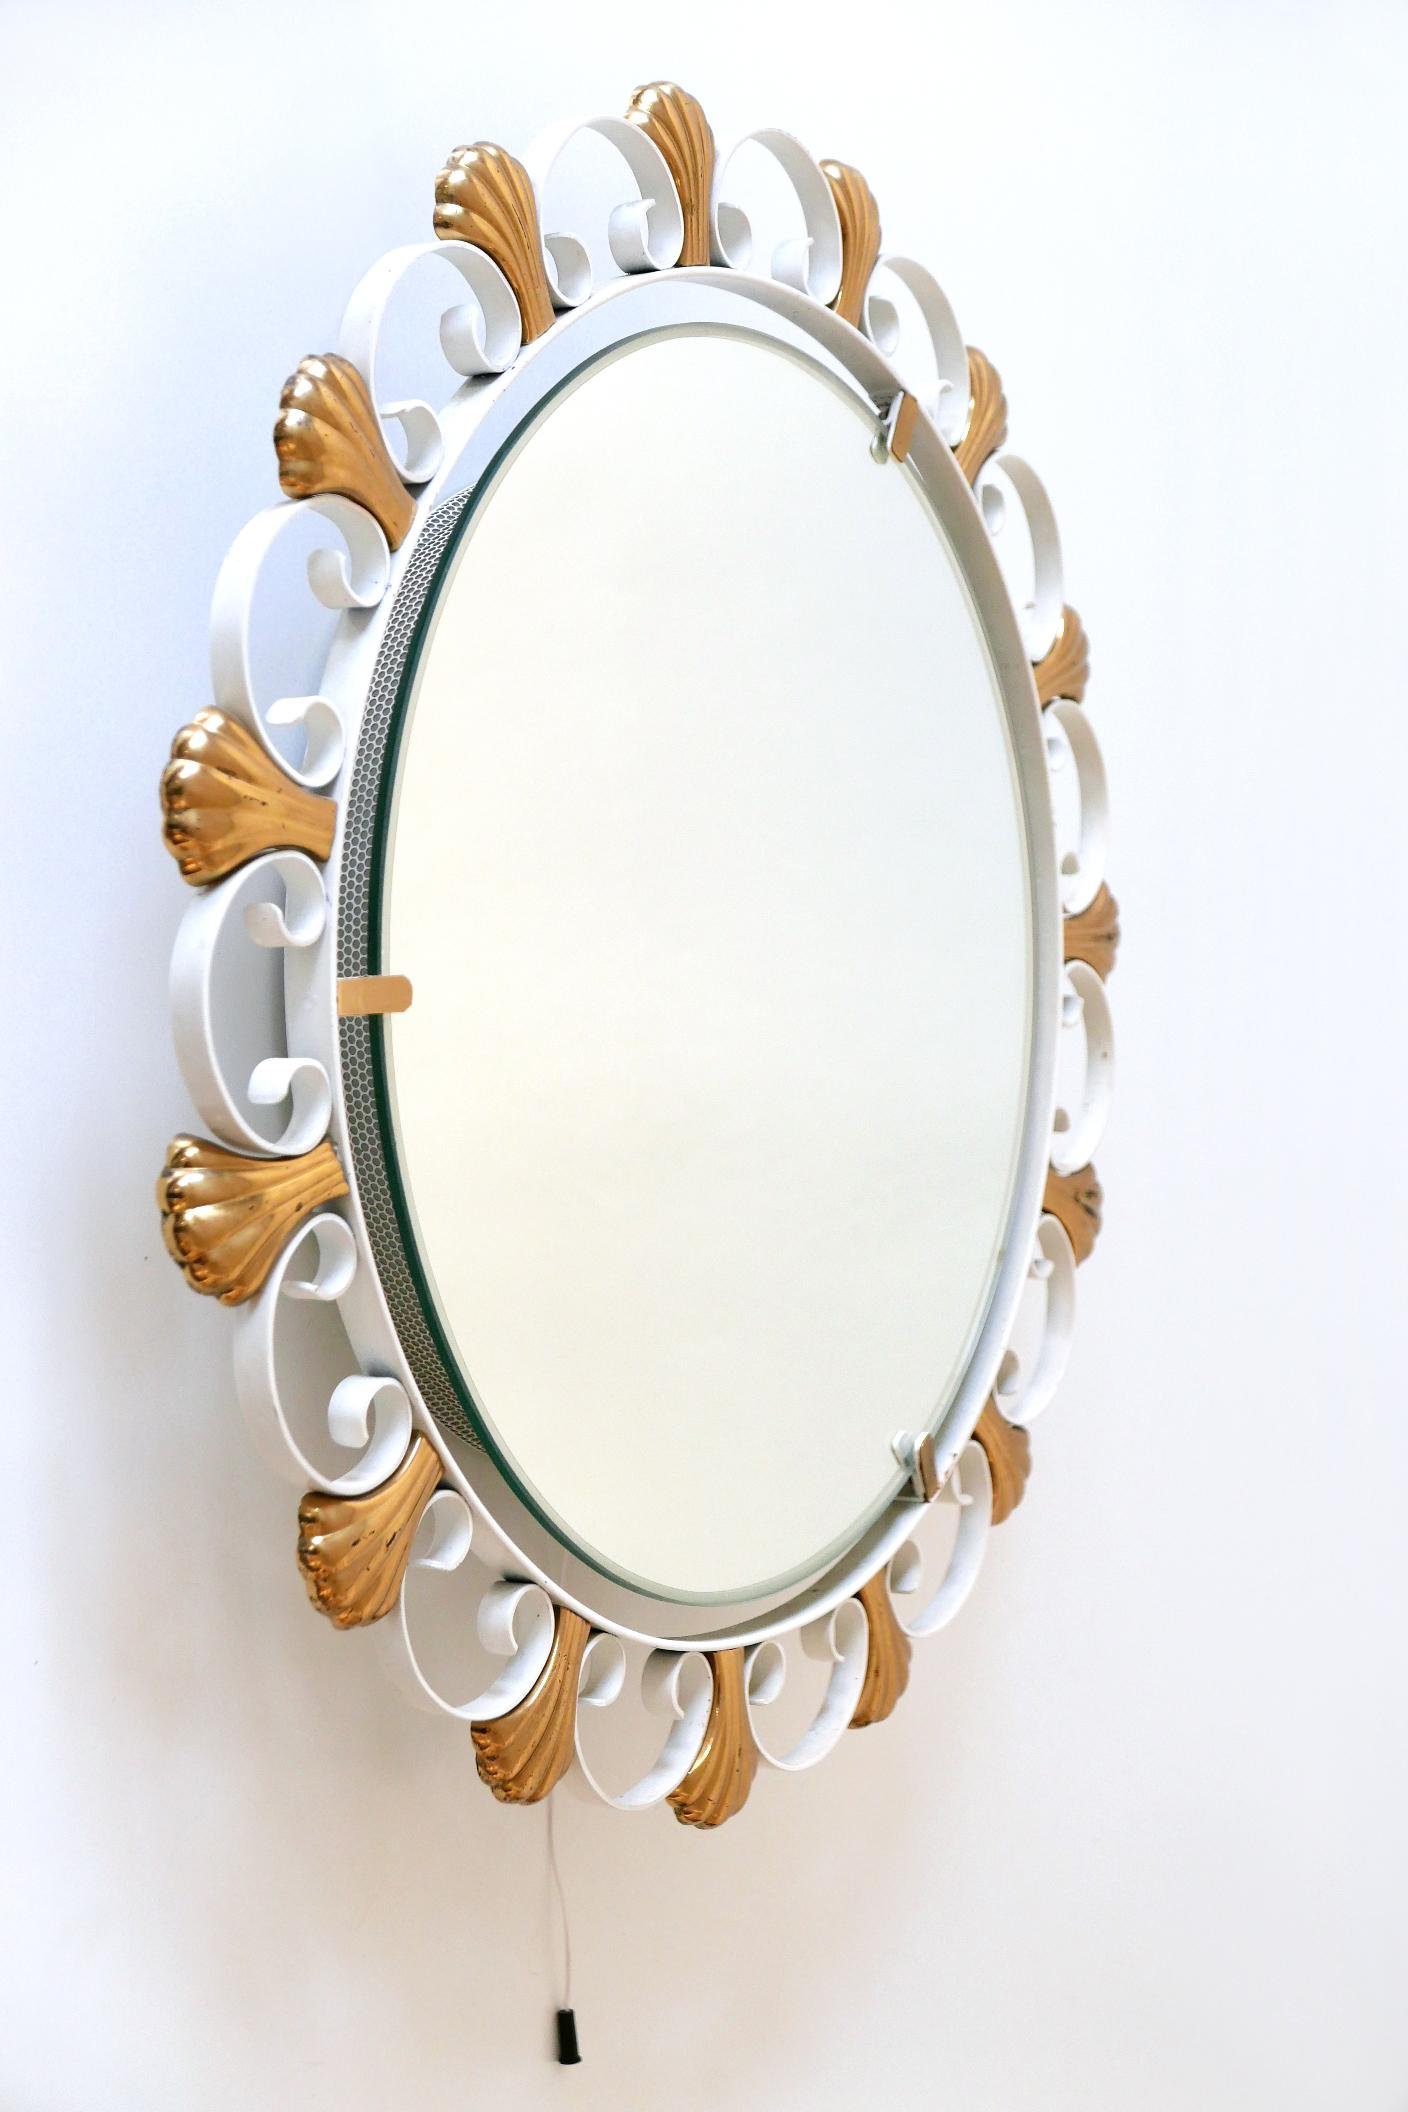 Elegant Mid-Century Modern Backlit Wall Mirror by Hillebrand, 1960s, Germany For Sale 5